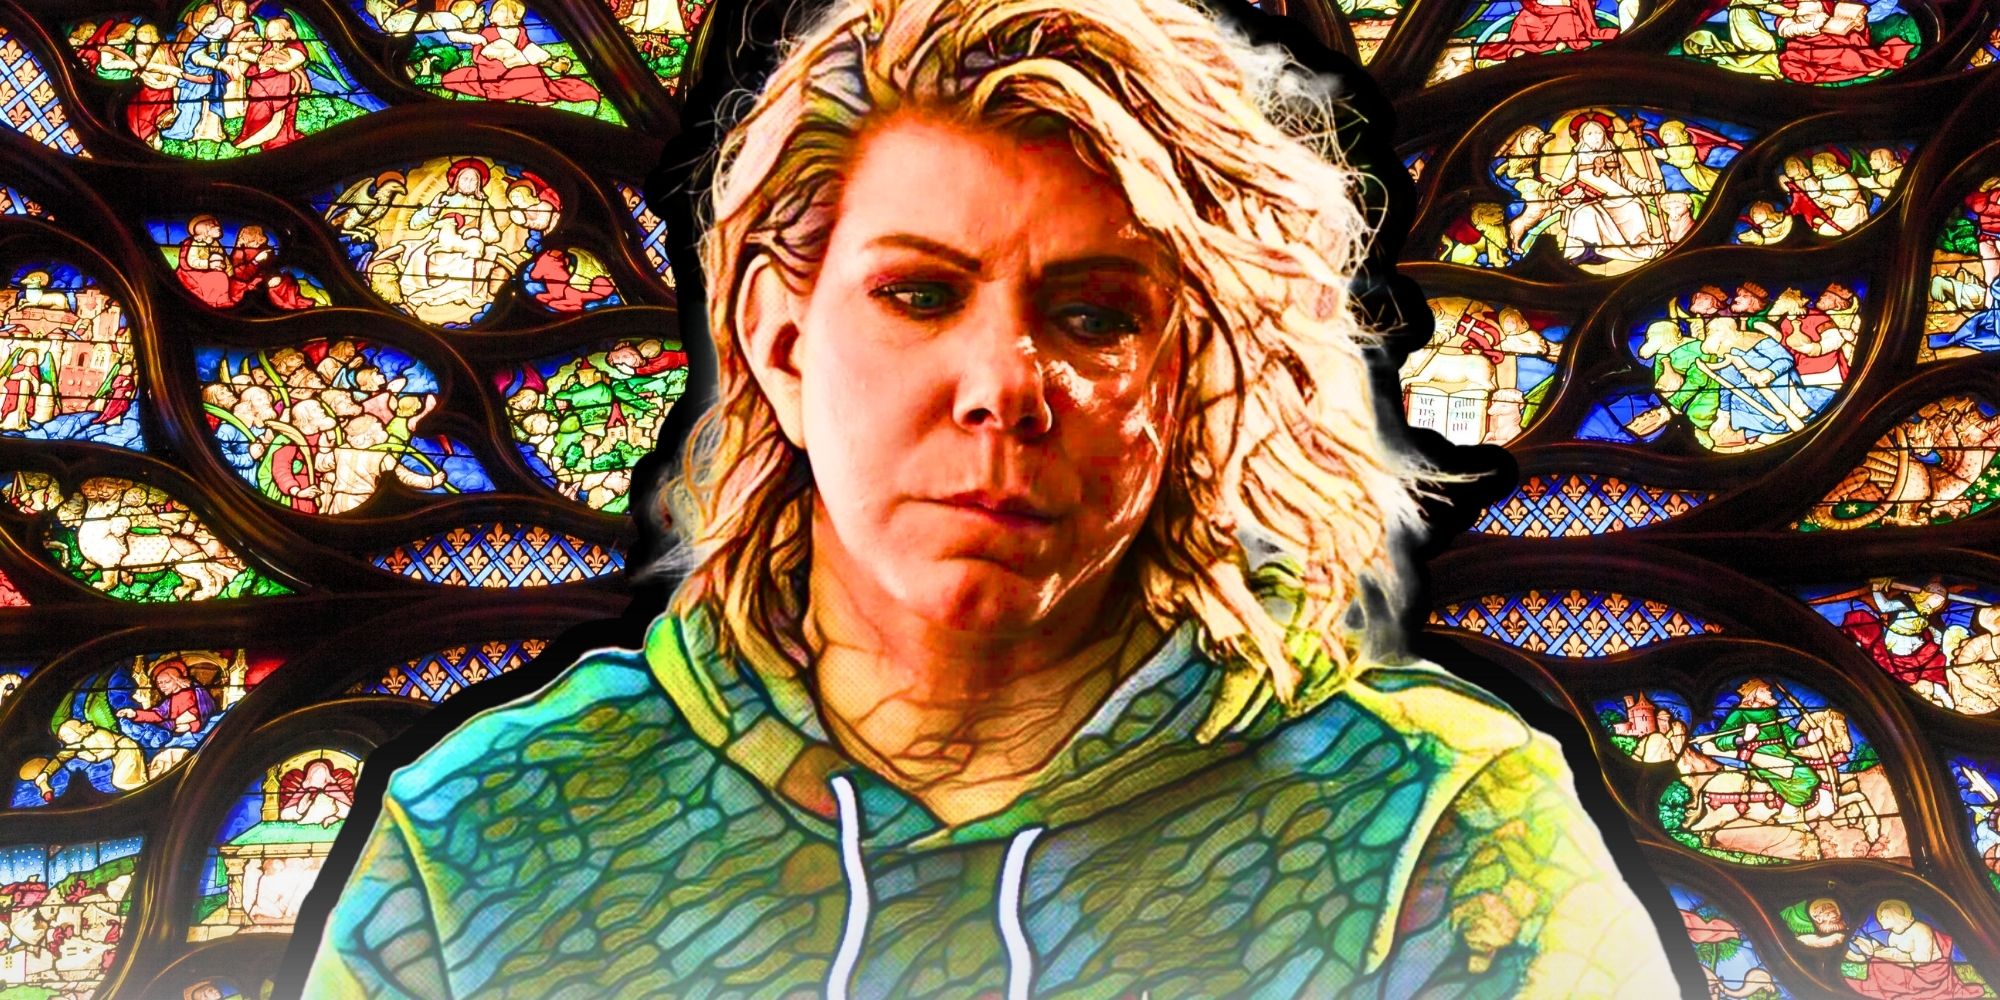 meri brown sister wives martyr stained glass effect